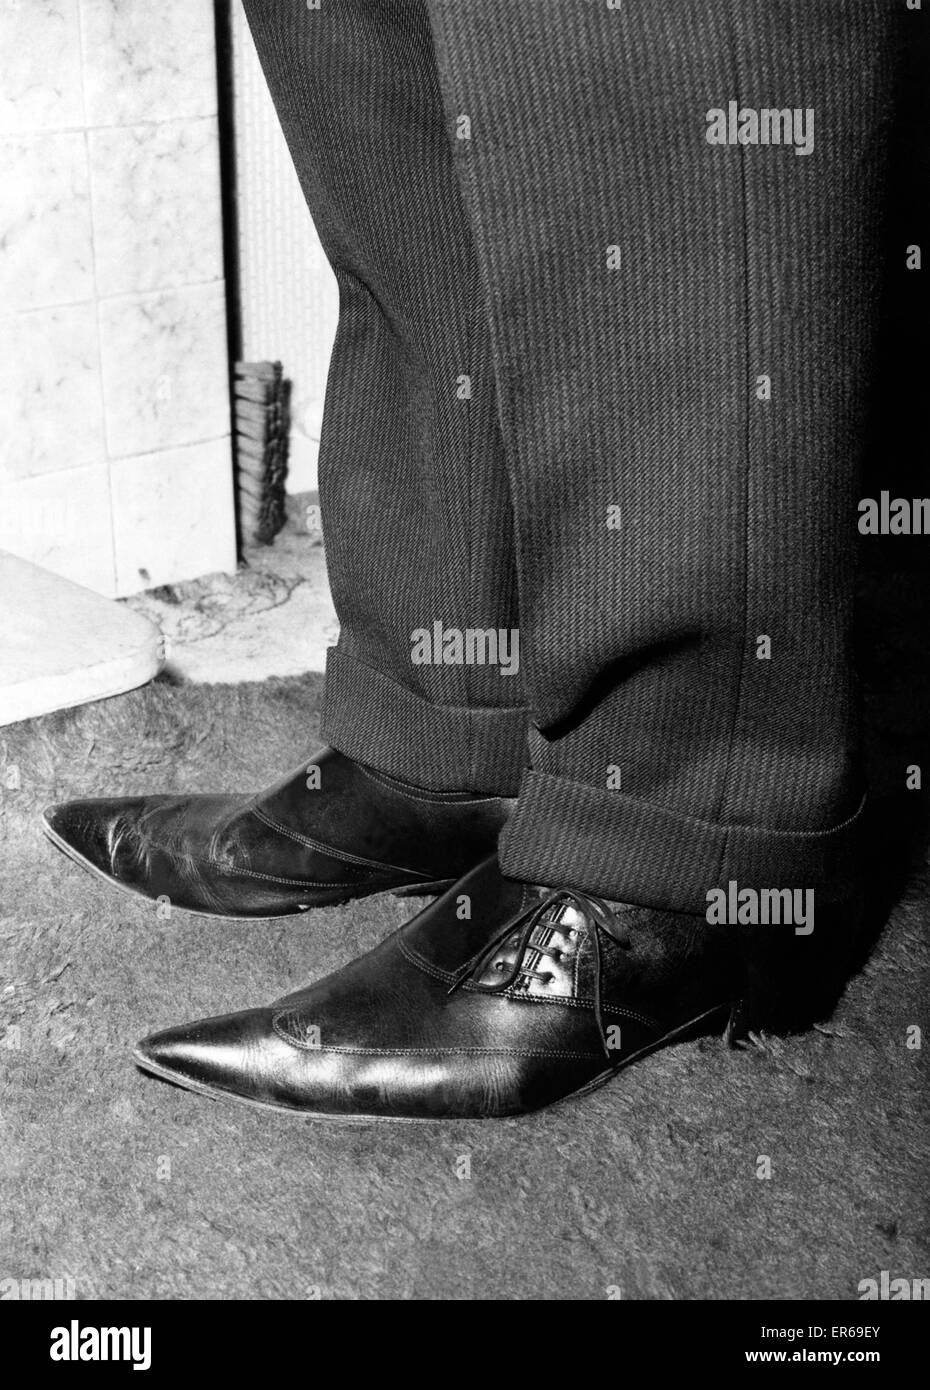 Winklepickers shoes, 1960. P025217 Stock Photo - Alamy